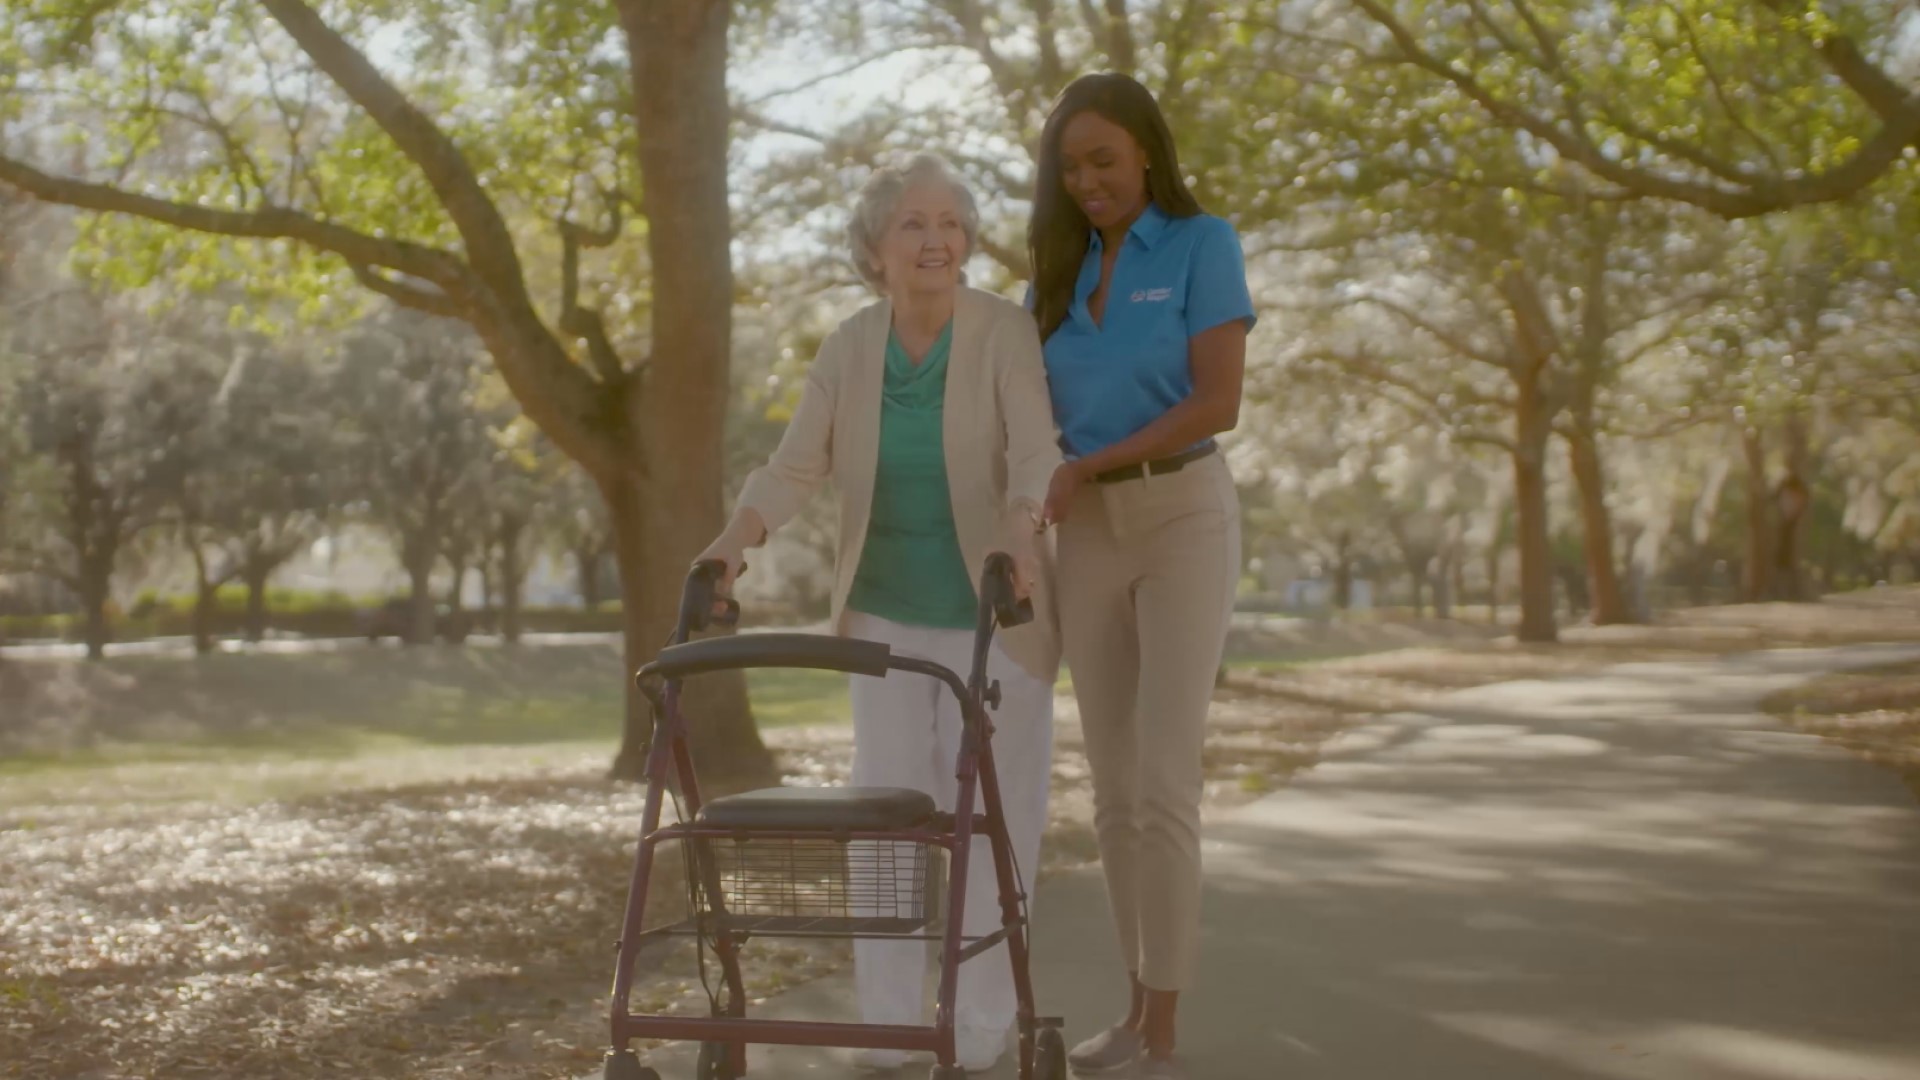 Looking for a new career? Comfort Keepers, a leading provider of uplifting in-home care for seniors and adults in need could have the right job for you.